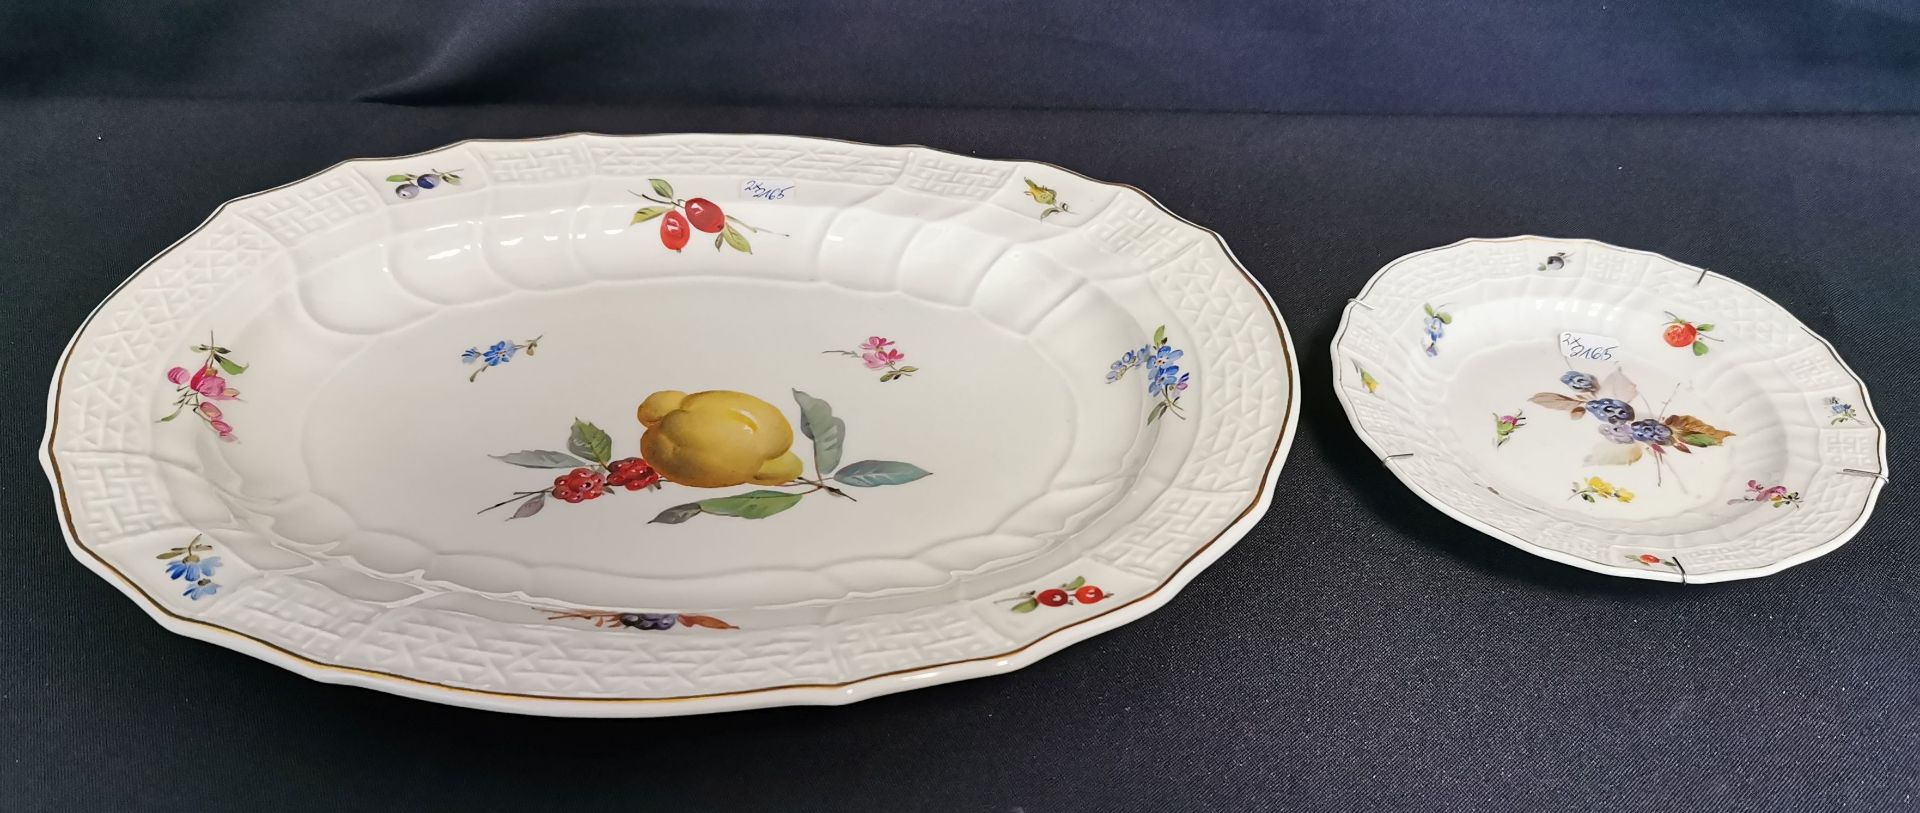 MEISSEN PLATE AND SMALL PLATE - Image 2 of 3